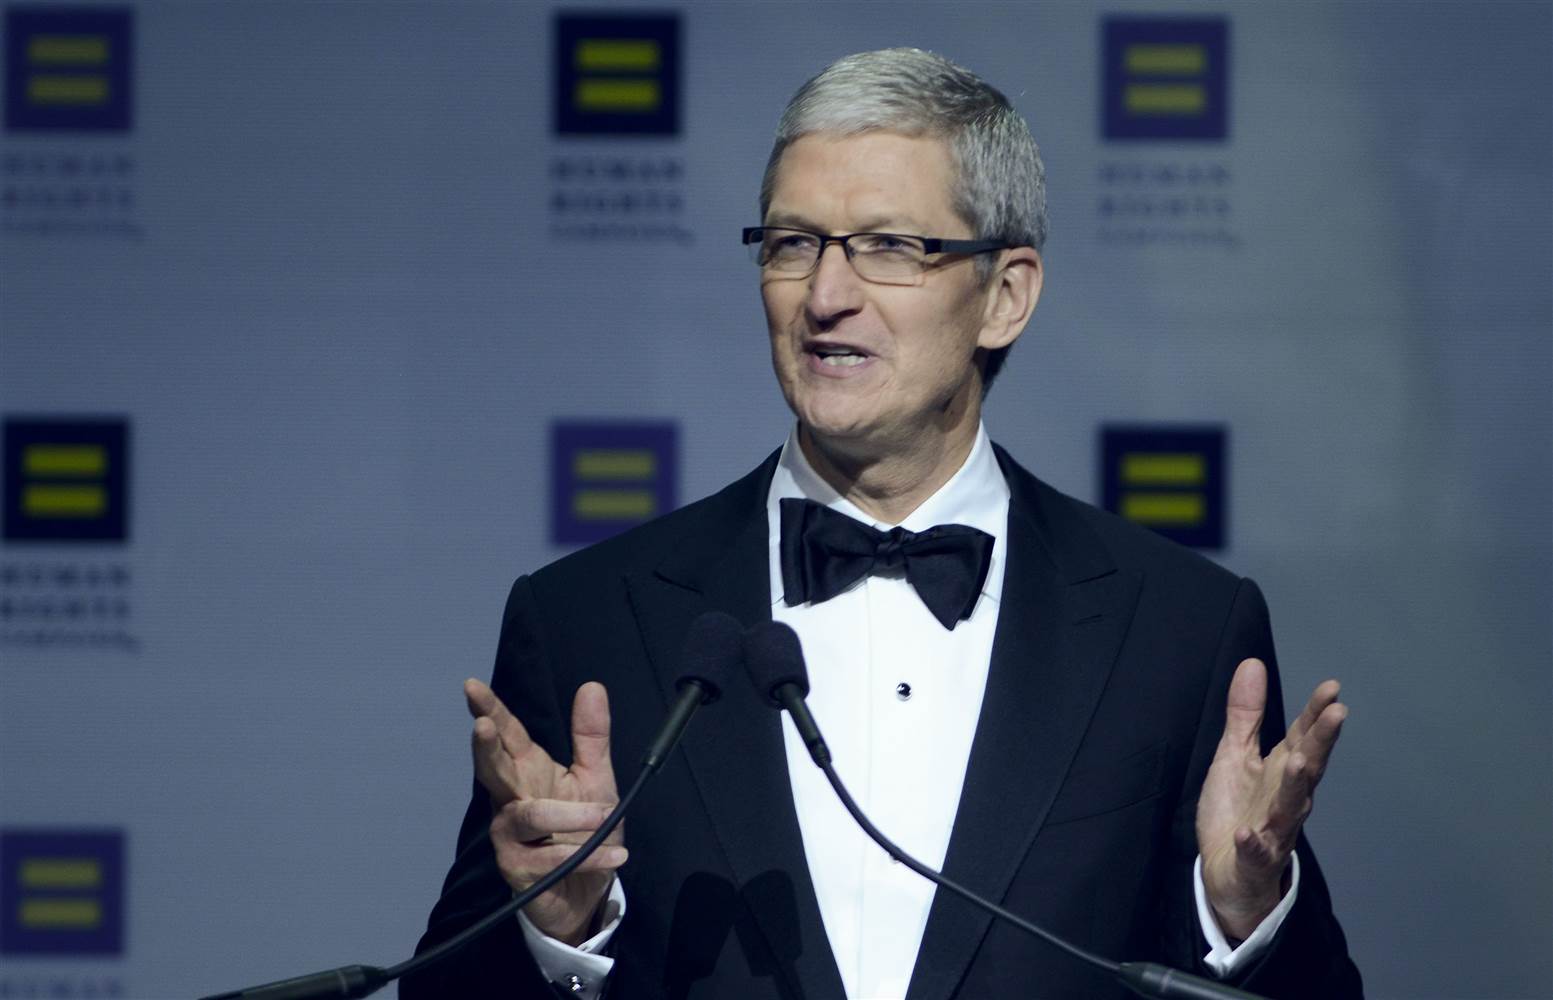 Tim Cook human rights defense